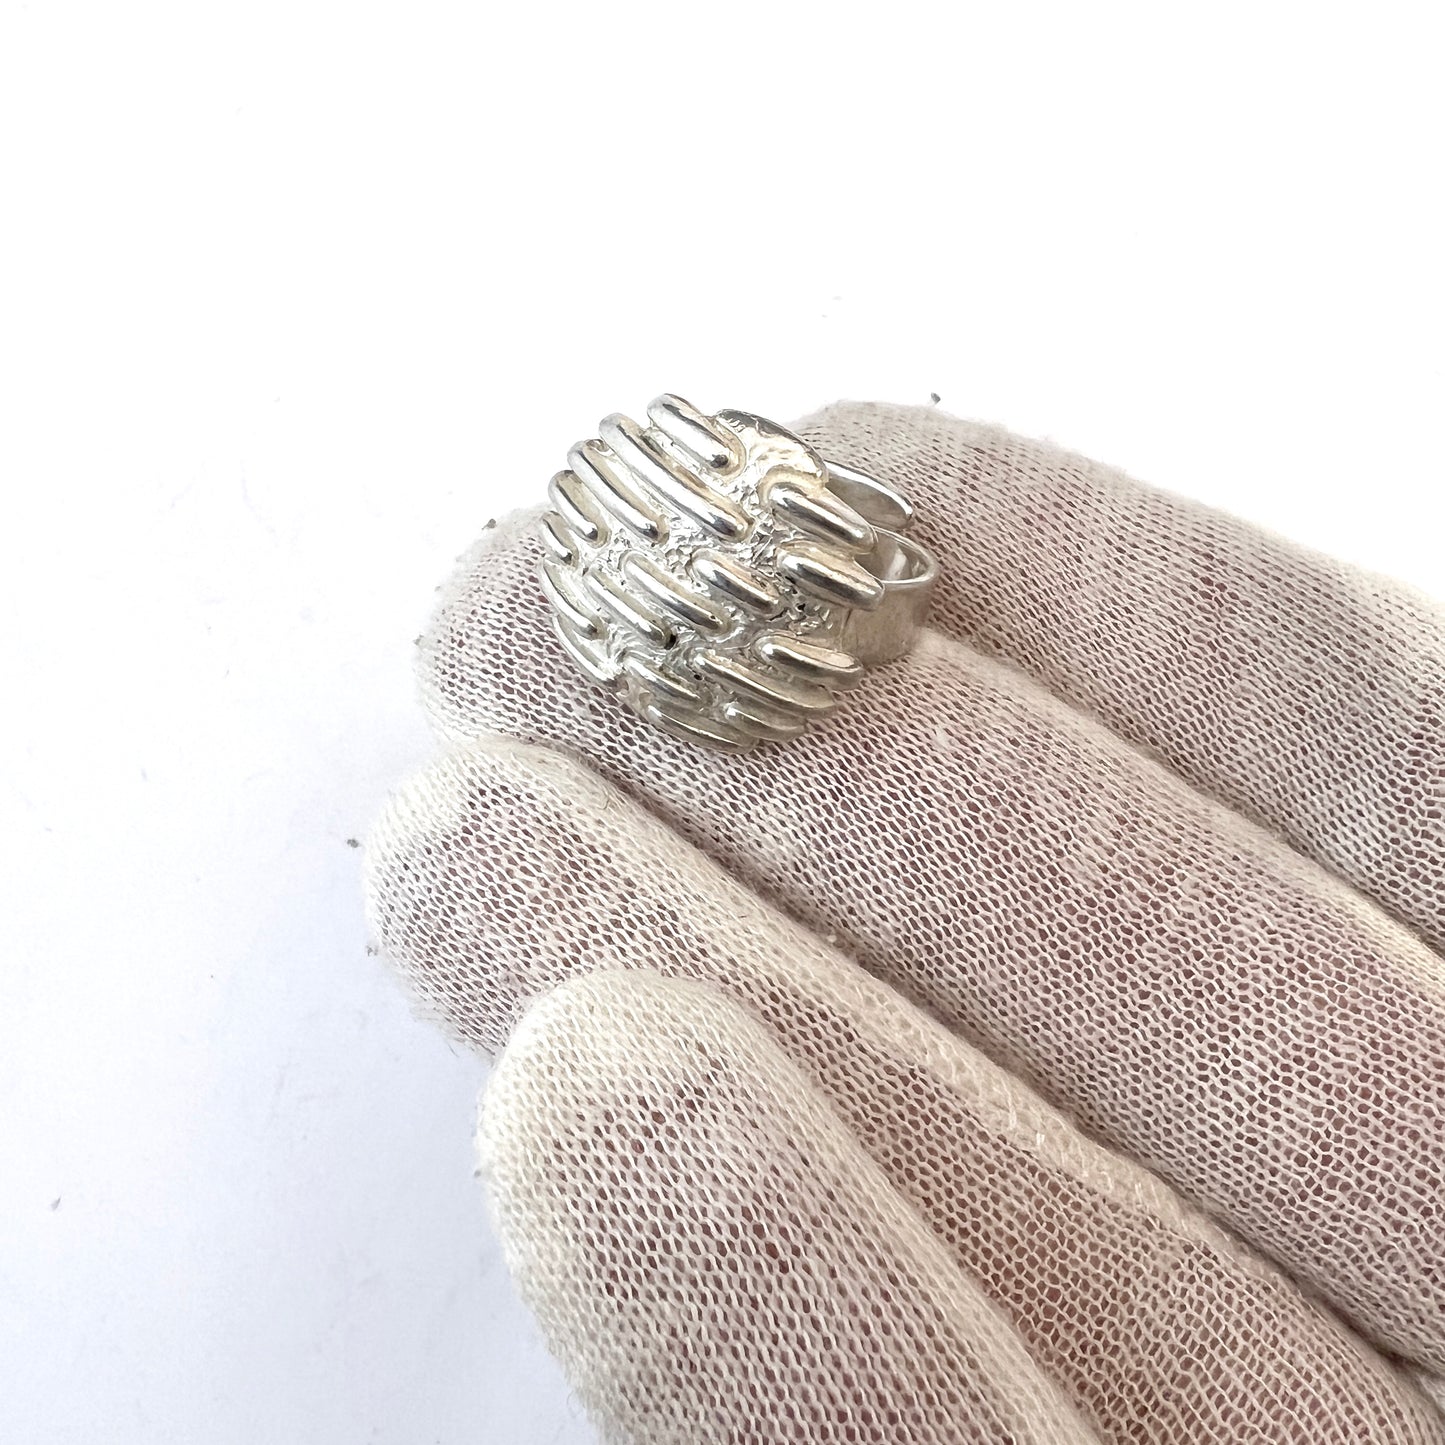 Maria Belen, Mexico. Sterling Silver Ring. Signed.